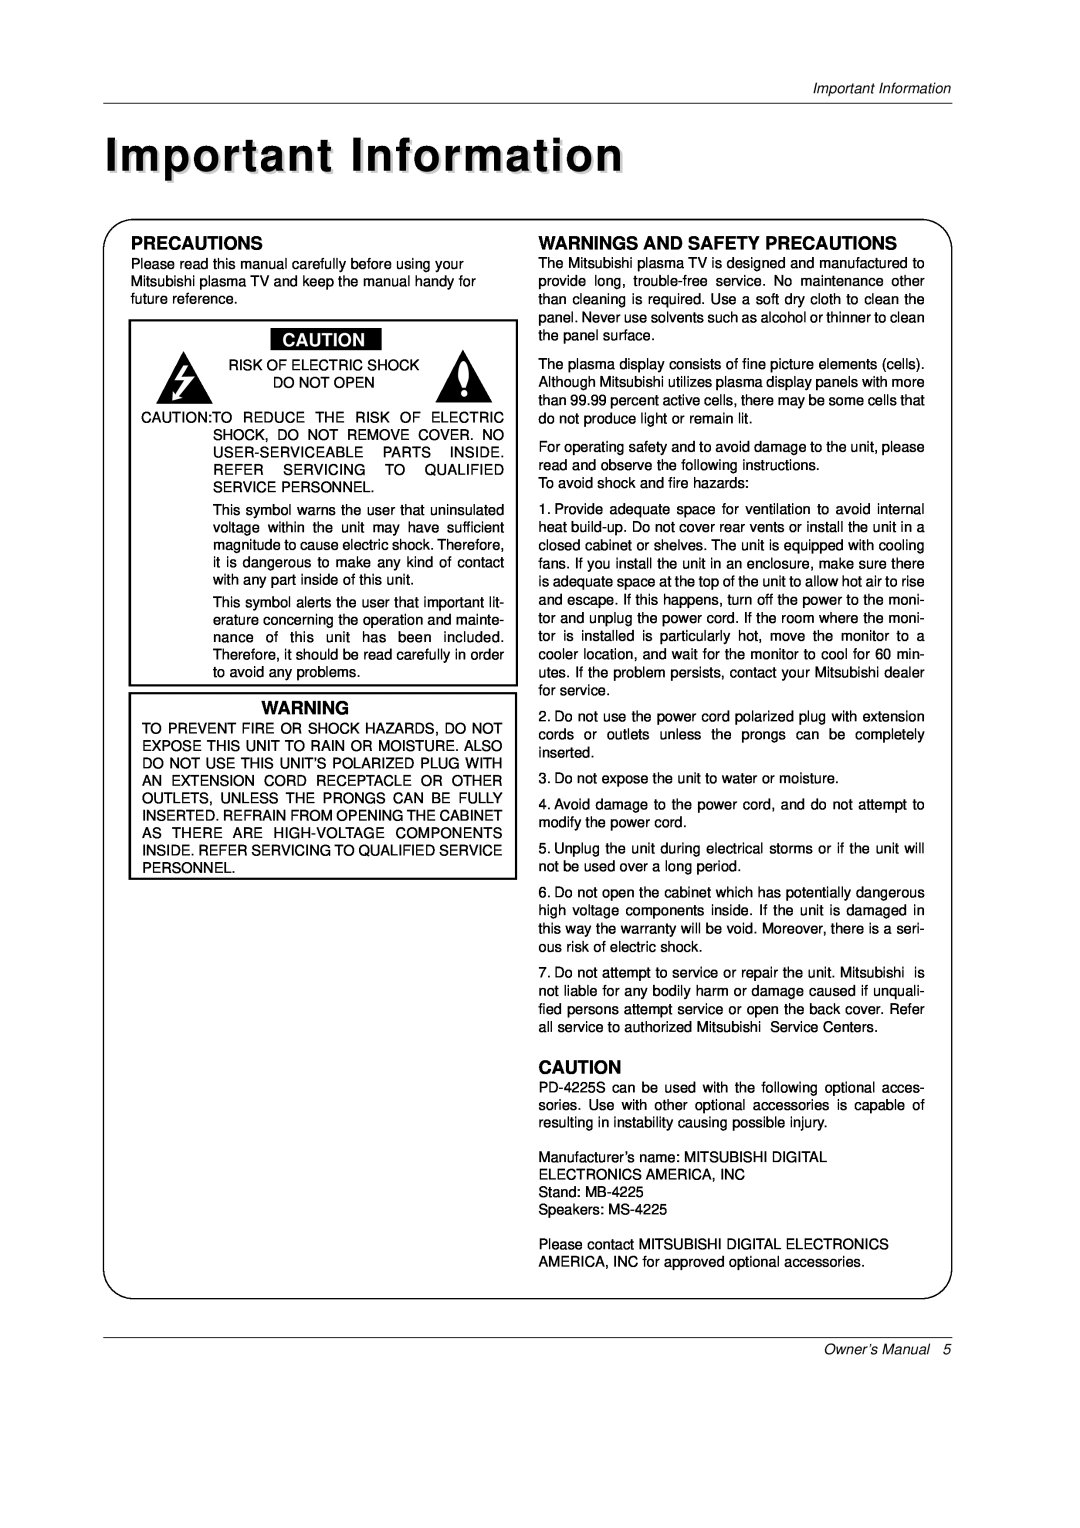 Mitsubishi Electronics PD-4225S manual Important Information, Warnings And Safety Precautions, Owner’s Manual 